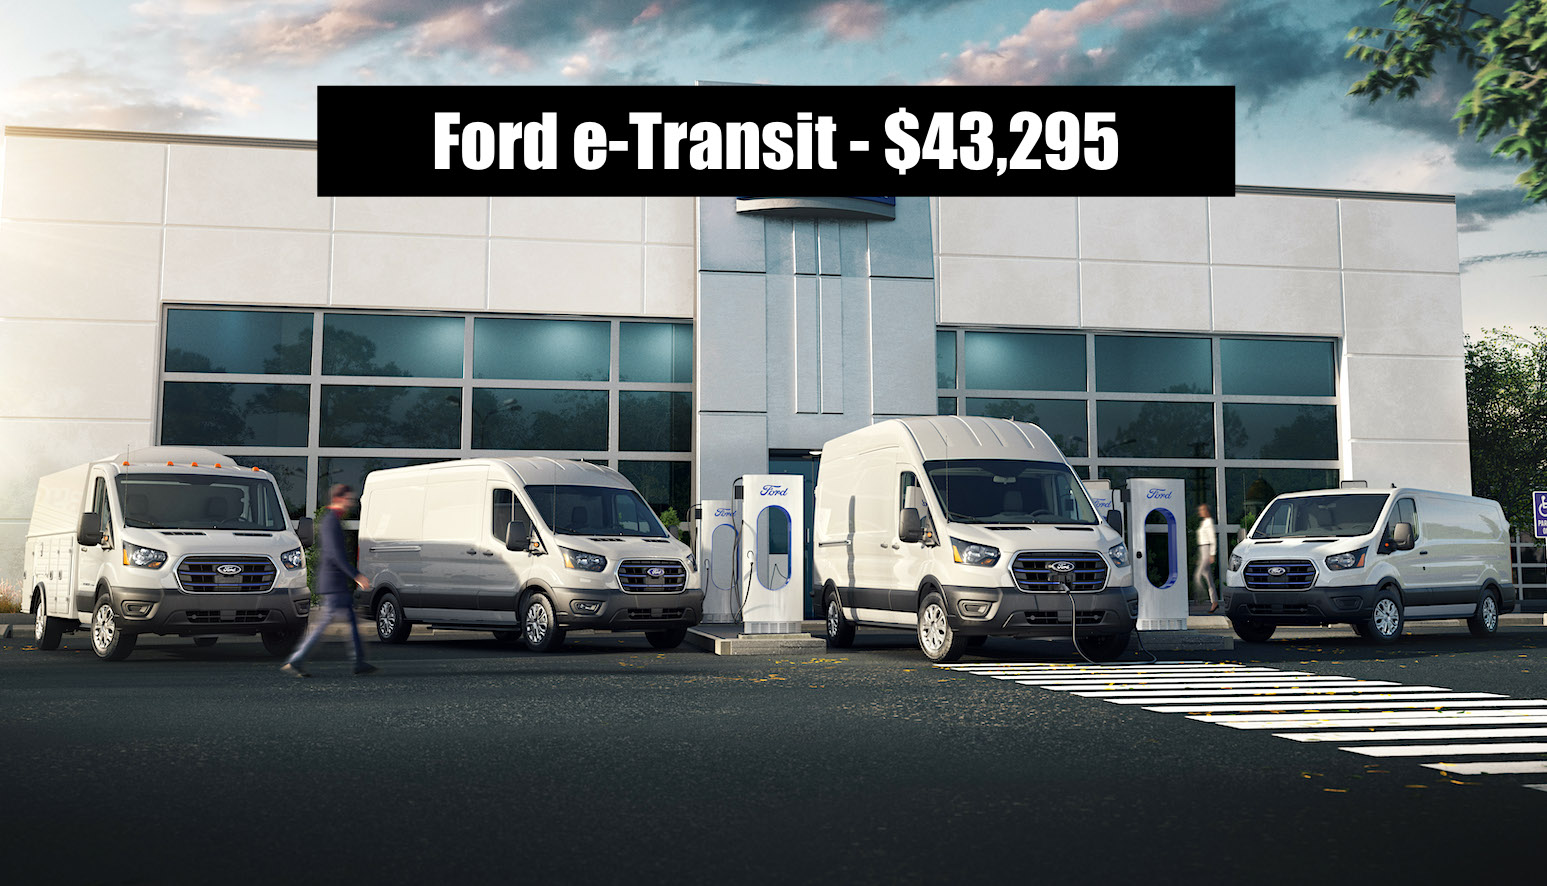 News: 2022 Ford e-Transit Price to ...